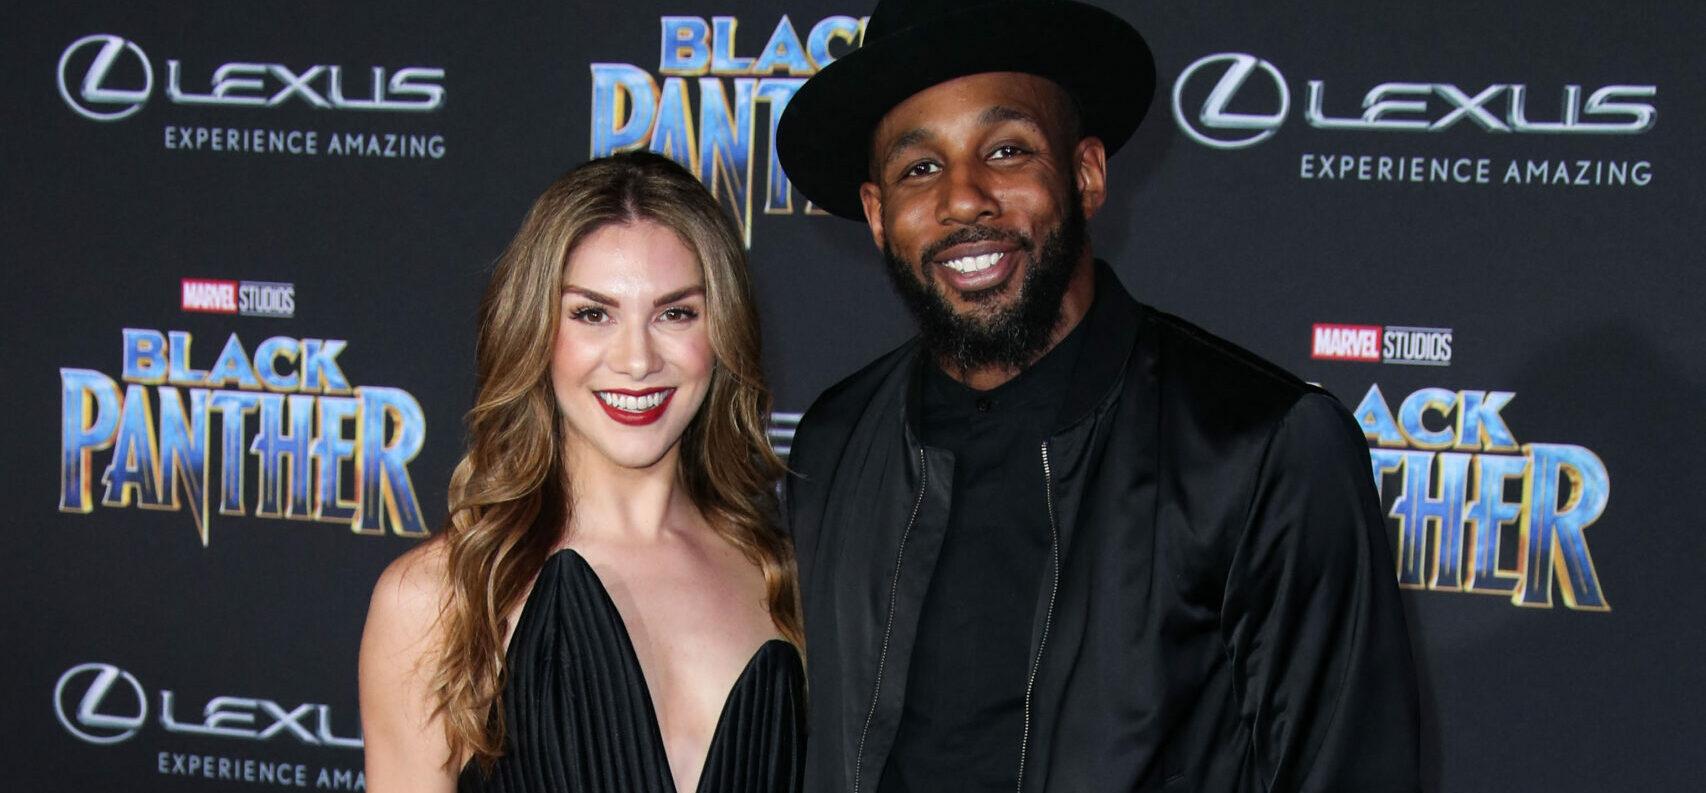 Allison Holker Lists Home For $3.8M Ten Months After The Death Of Steven ‘tWitch’ Boss